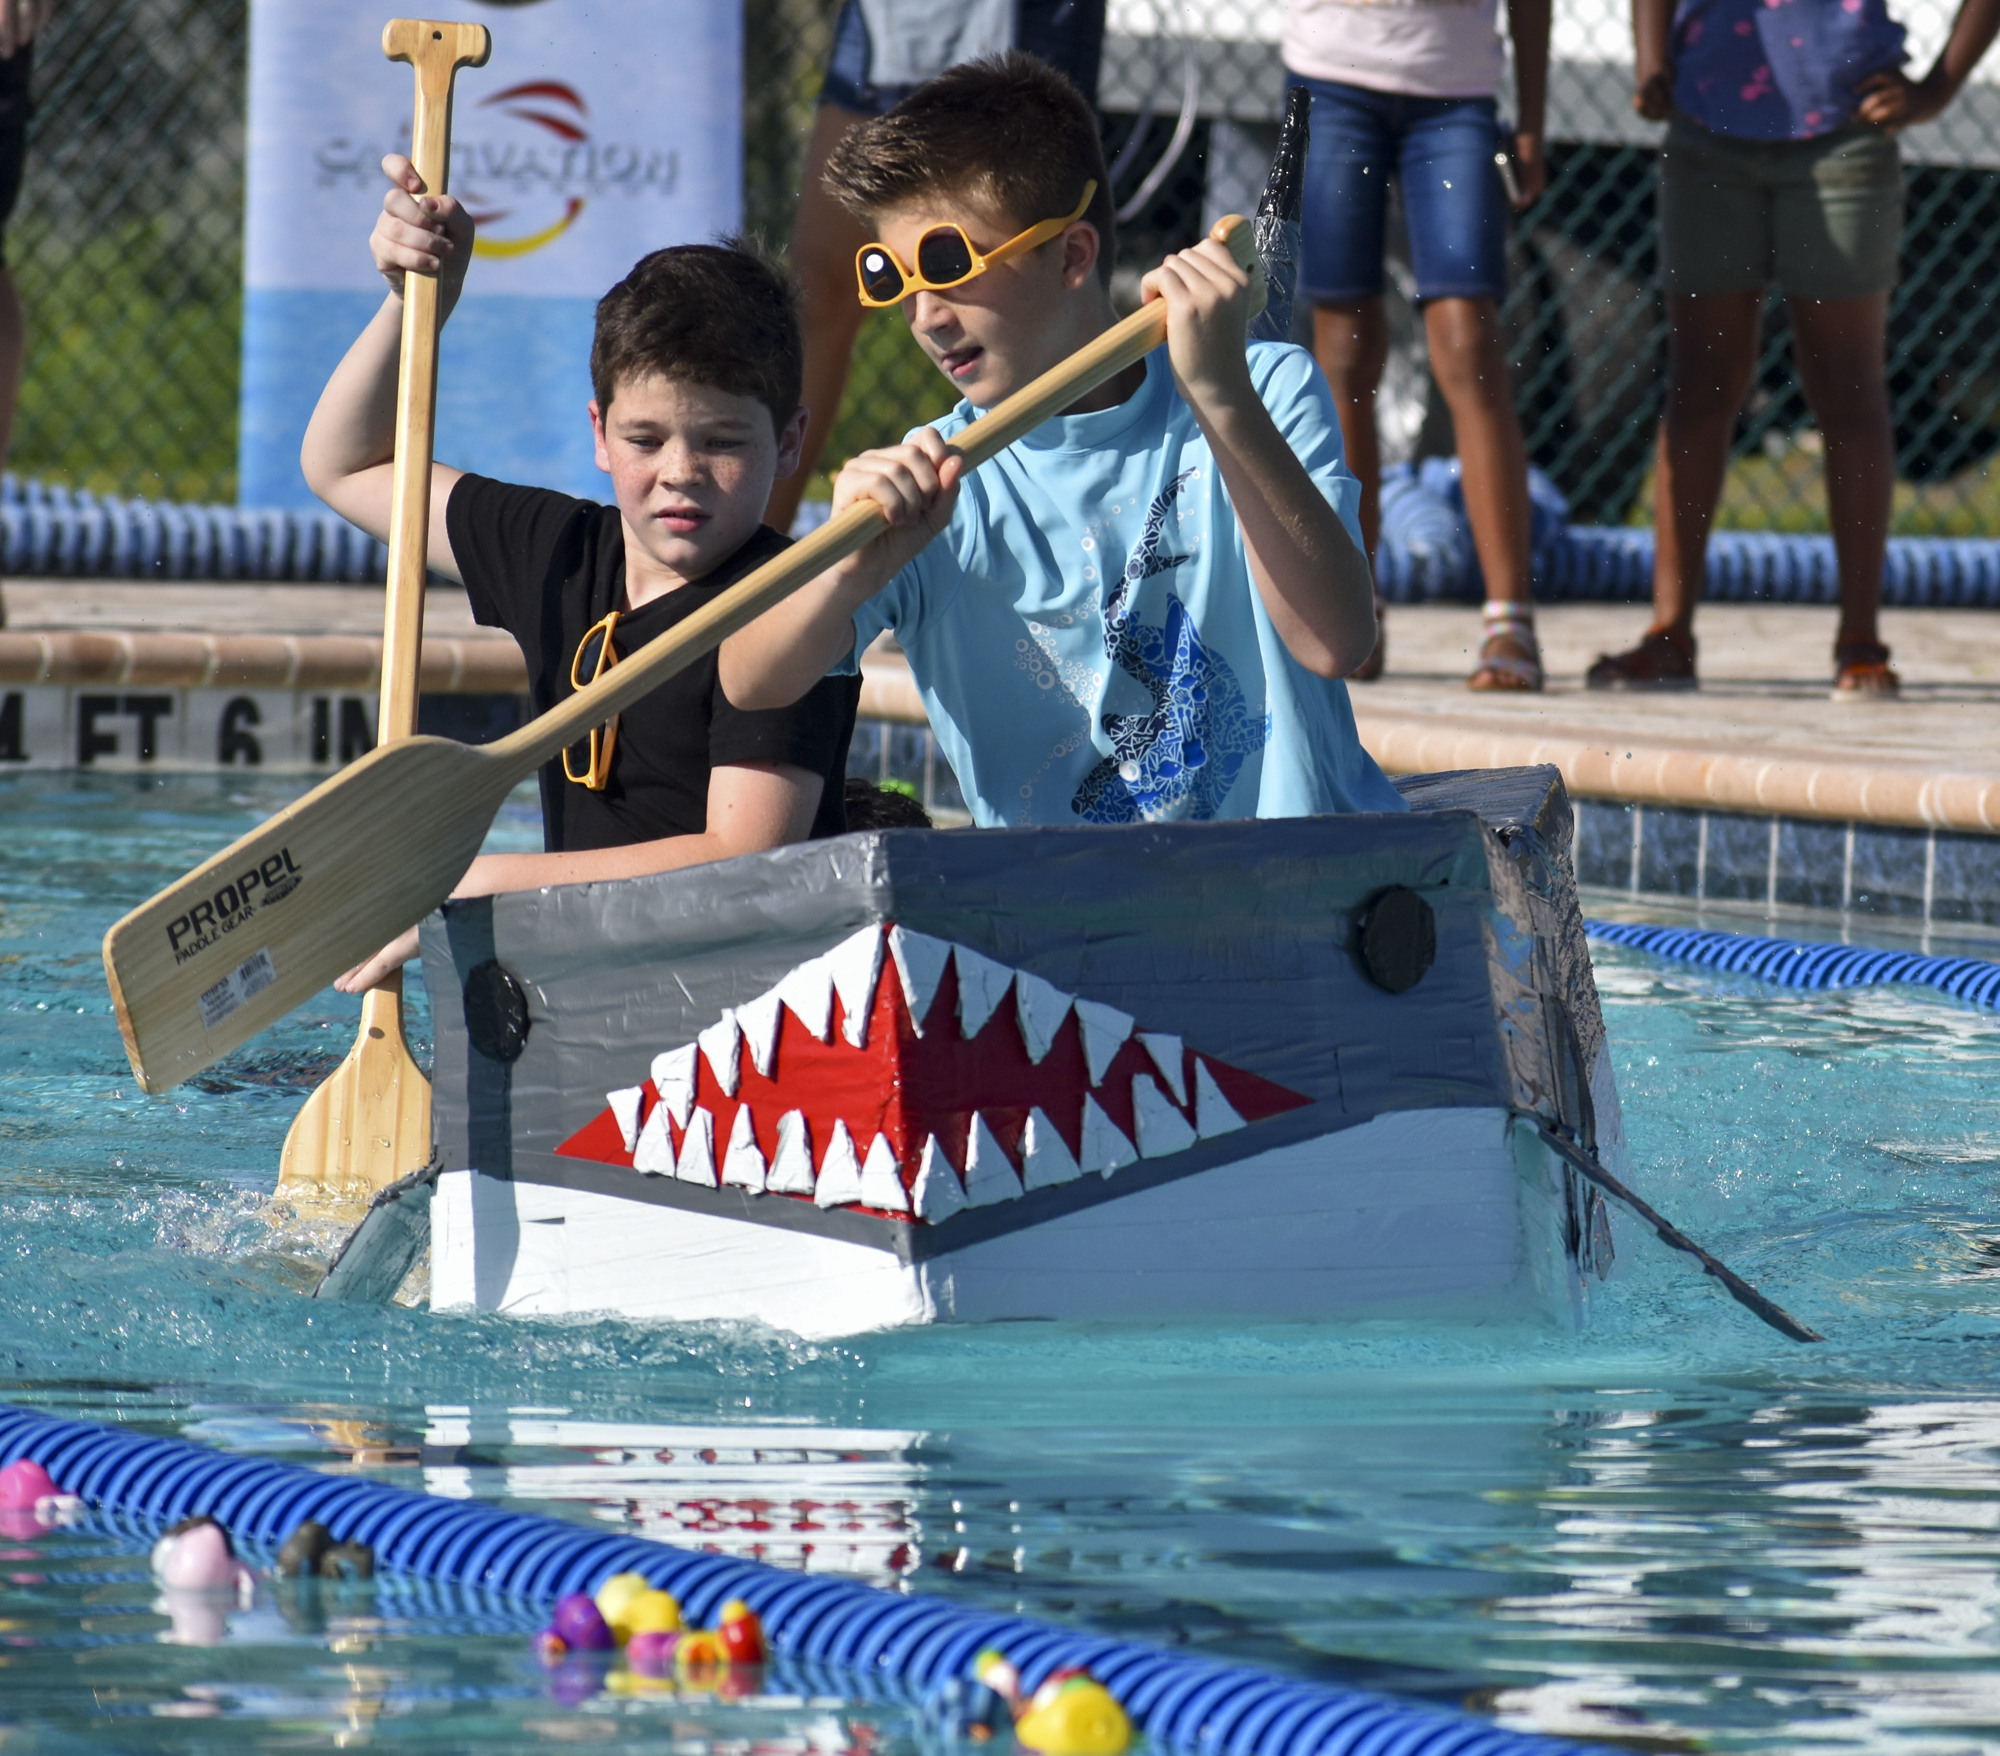 Cardboard, water and paddles added up to another round of annual fun at the third annual Rock the Boat Regatta 